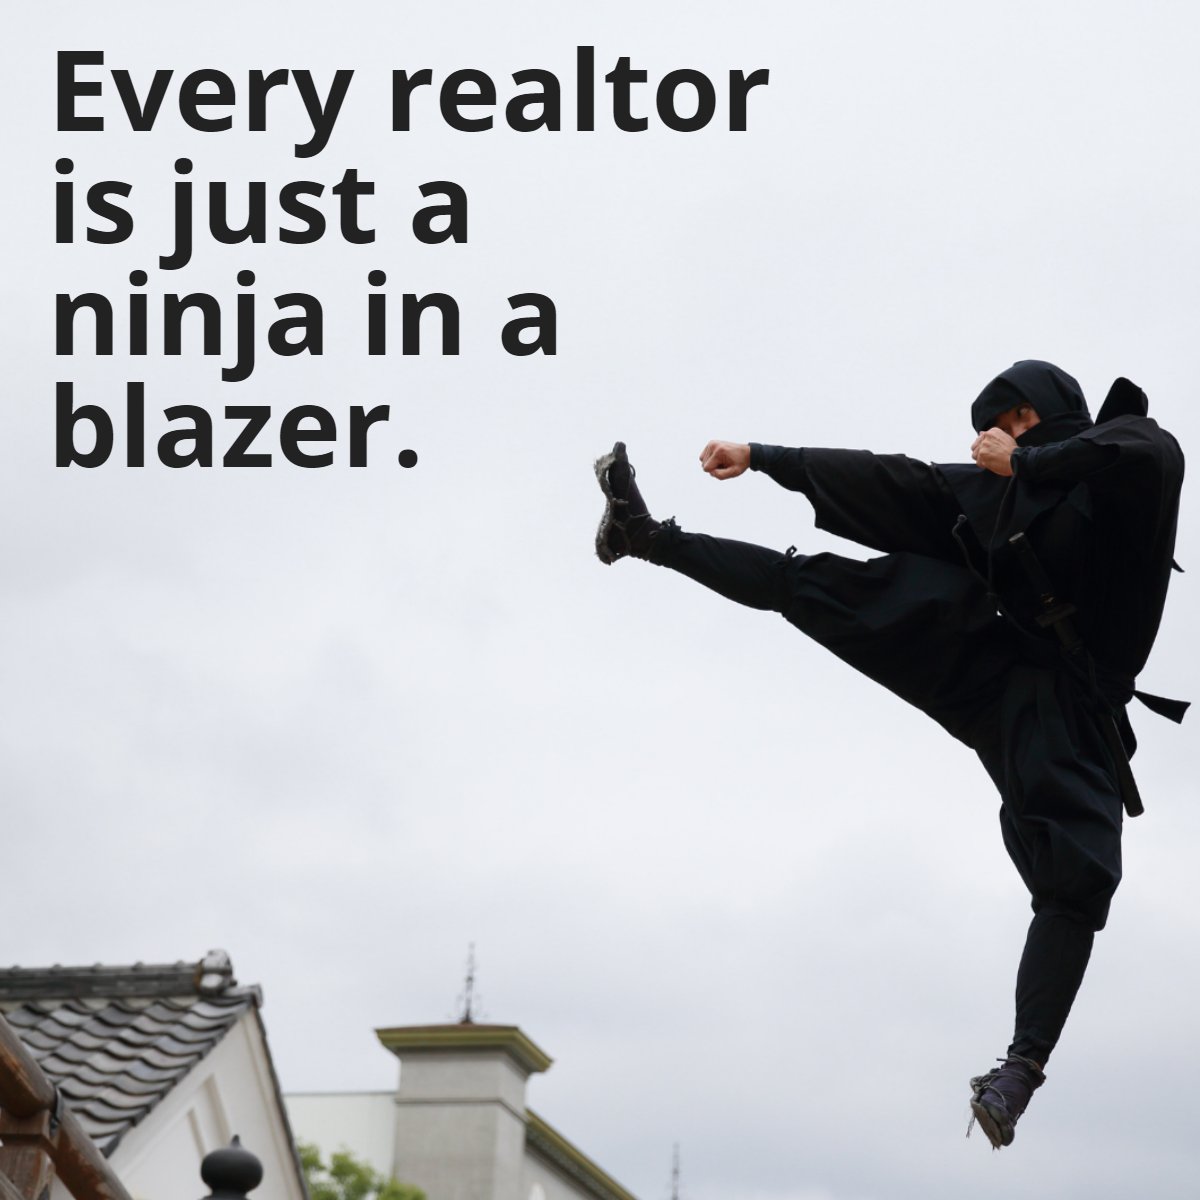 Being a Realtor is a hard job, but I'm glad I do it. 💯

#homeselling #sellingyourhome #realestateinvestment #realestatemarket #realtorlifestyle #realtorlife